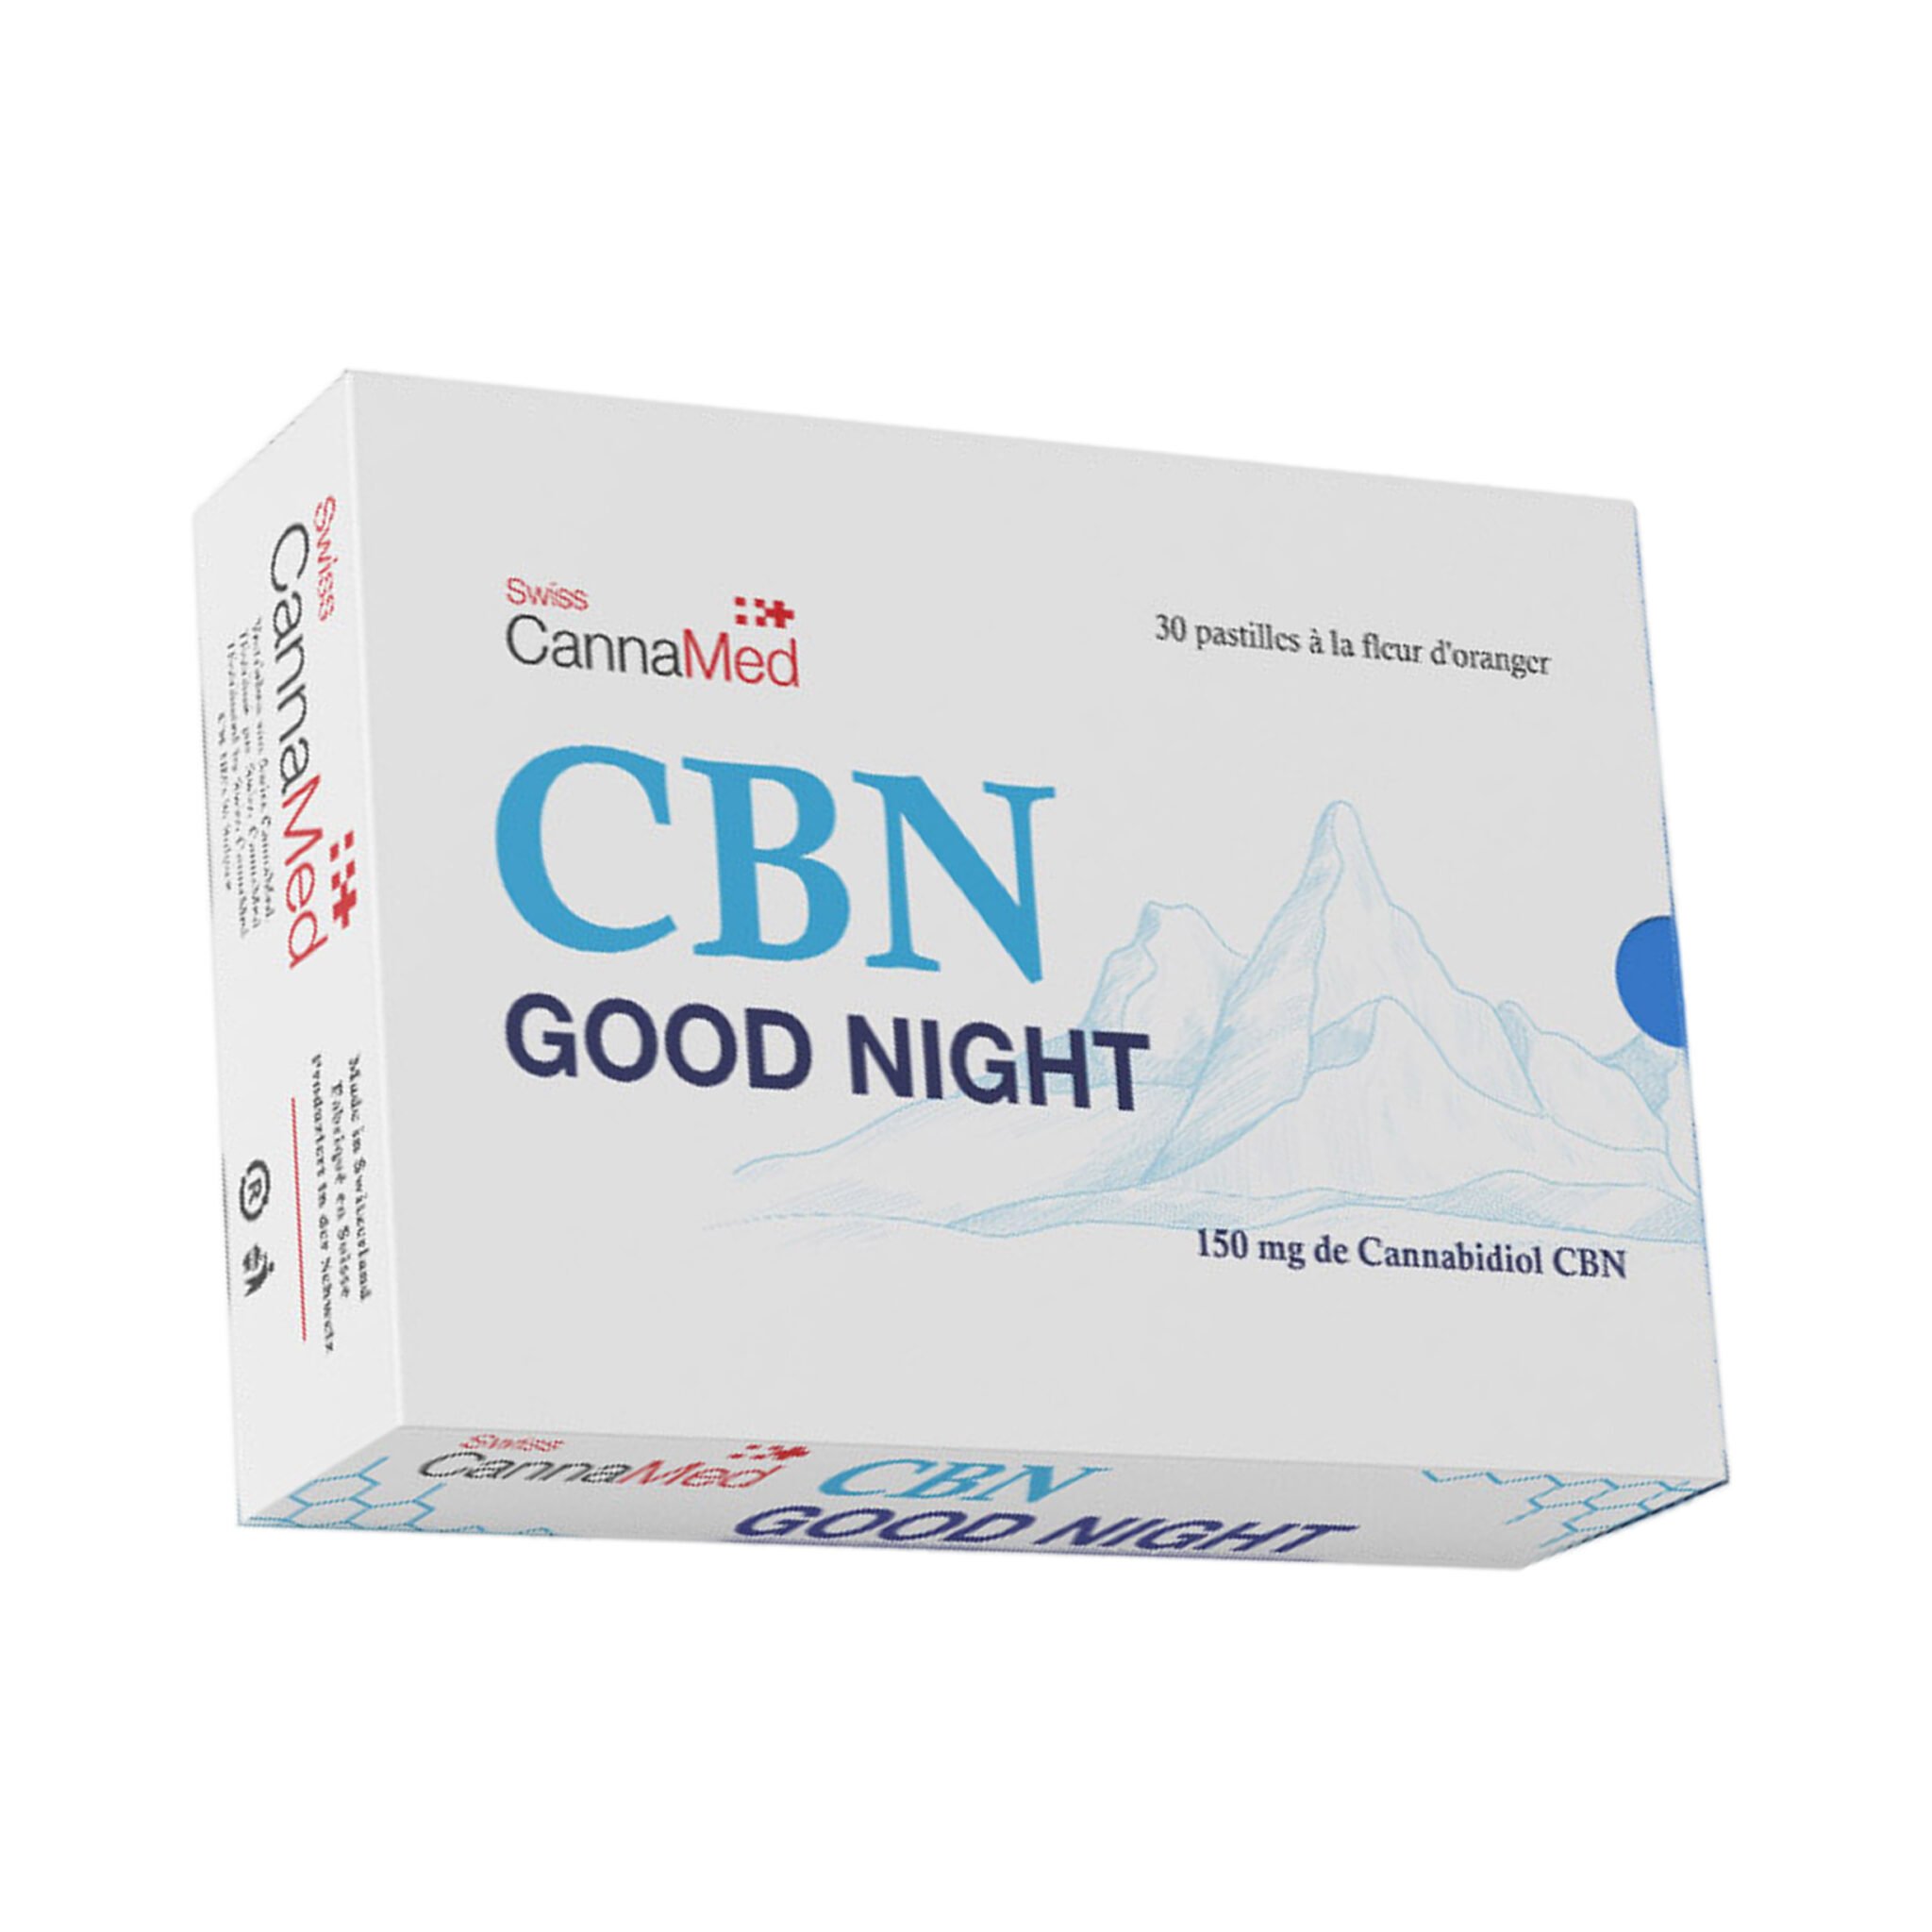 Swiss CannaMed CBN Good Night, Swiss CannaMed